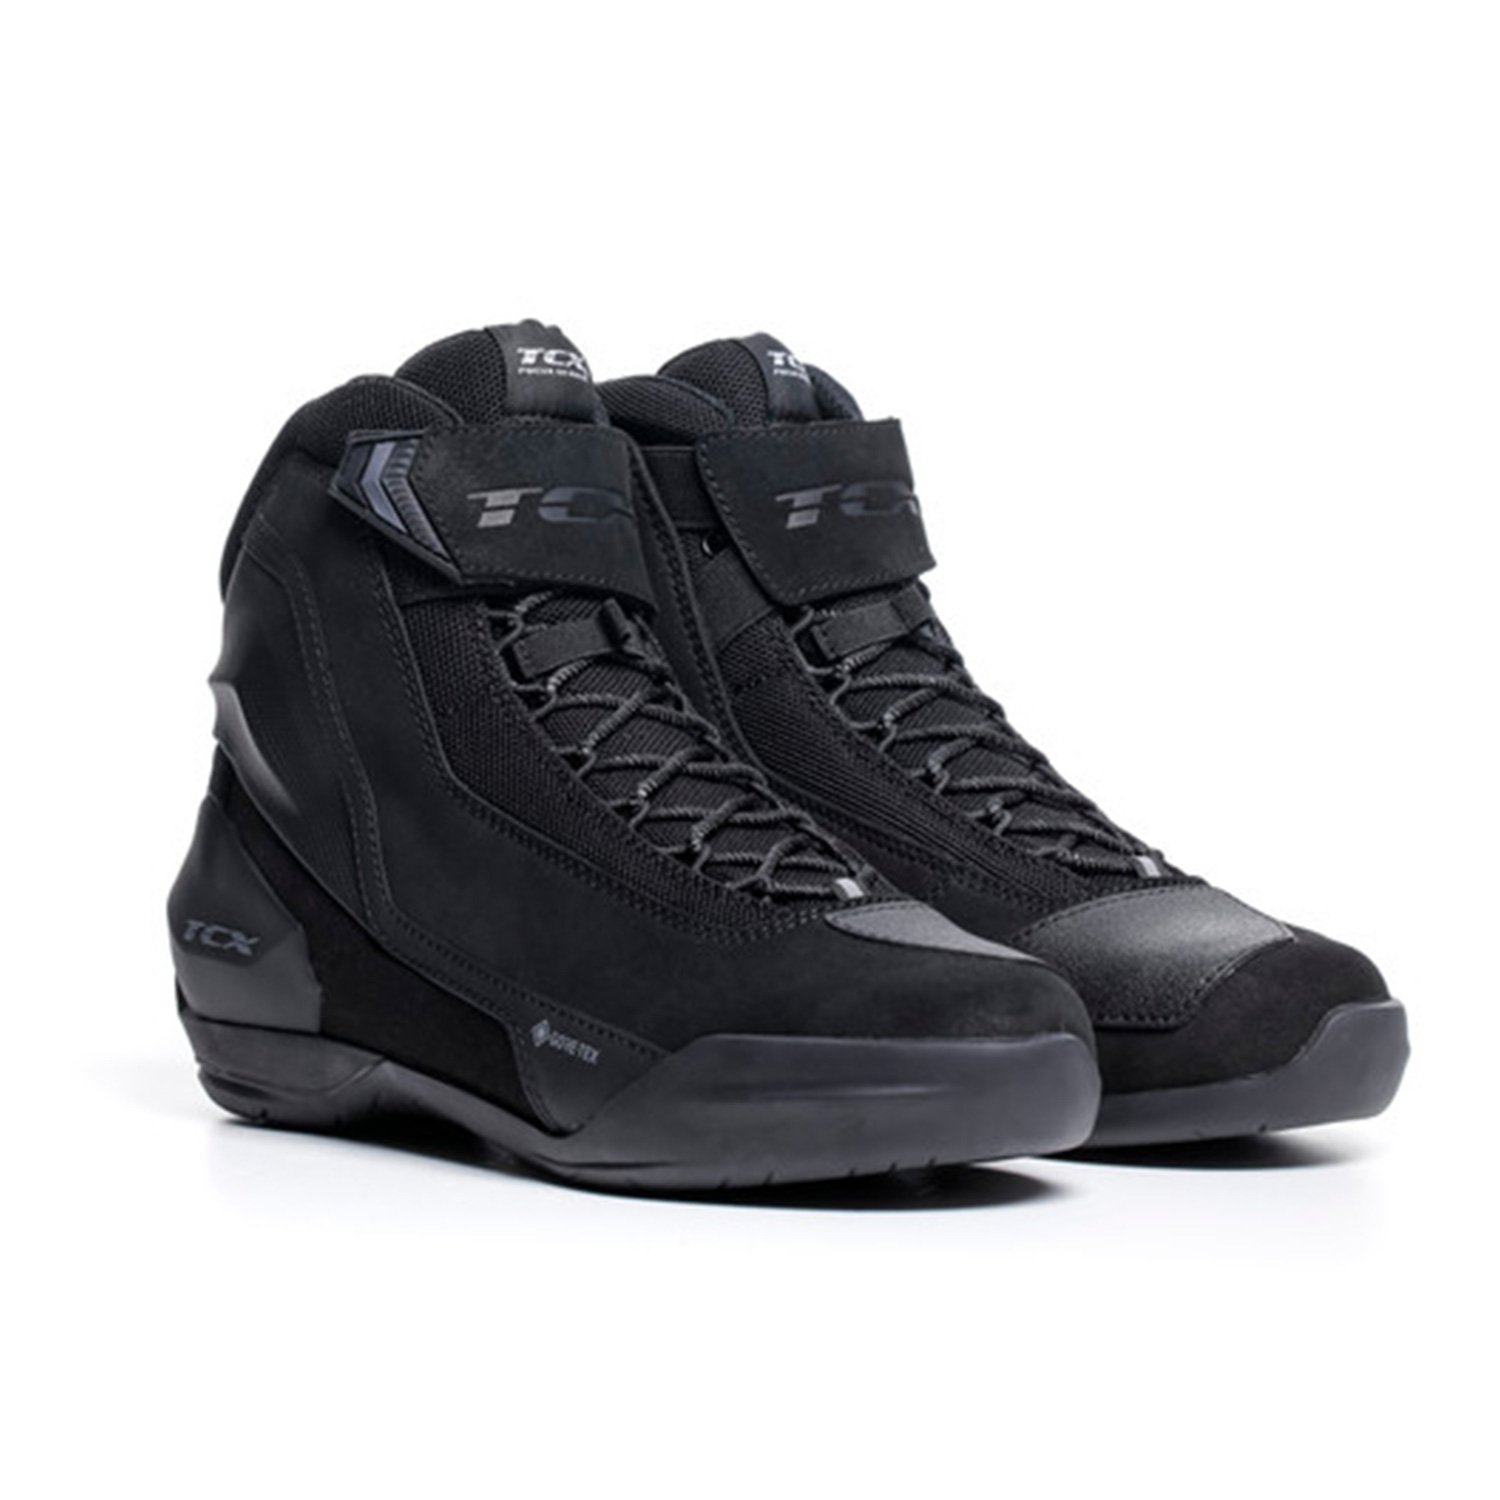 Image of TCX Jupiter 5 Gore-Tex Noir Chaussures Taille 46